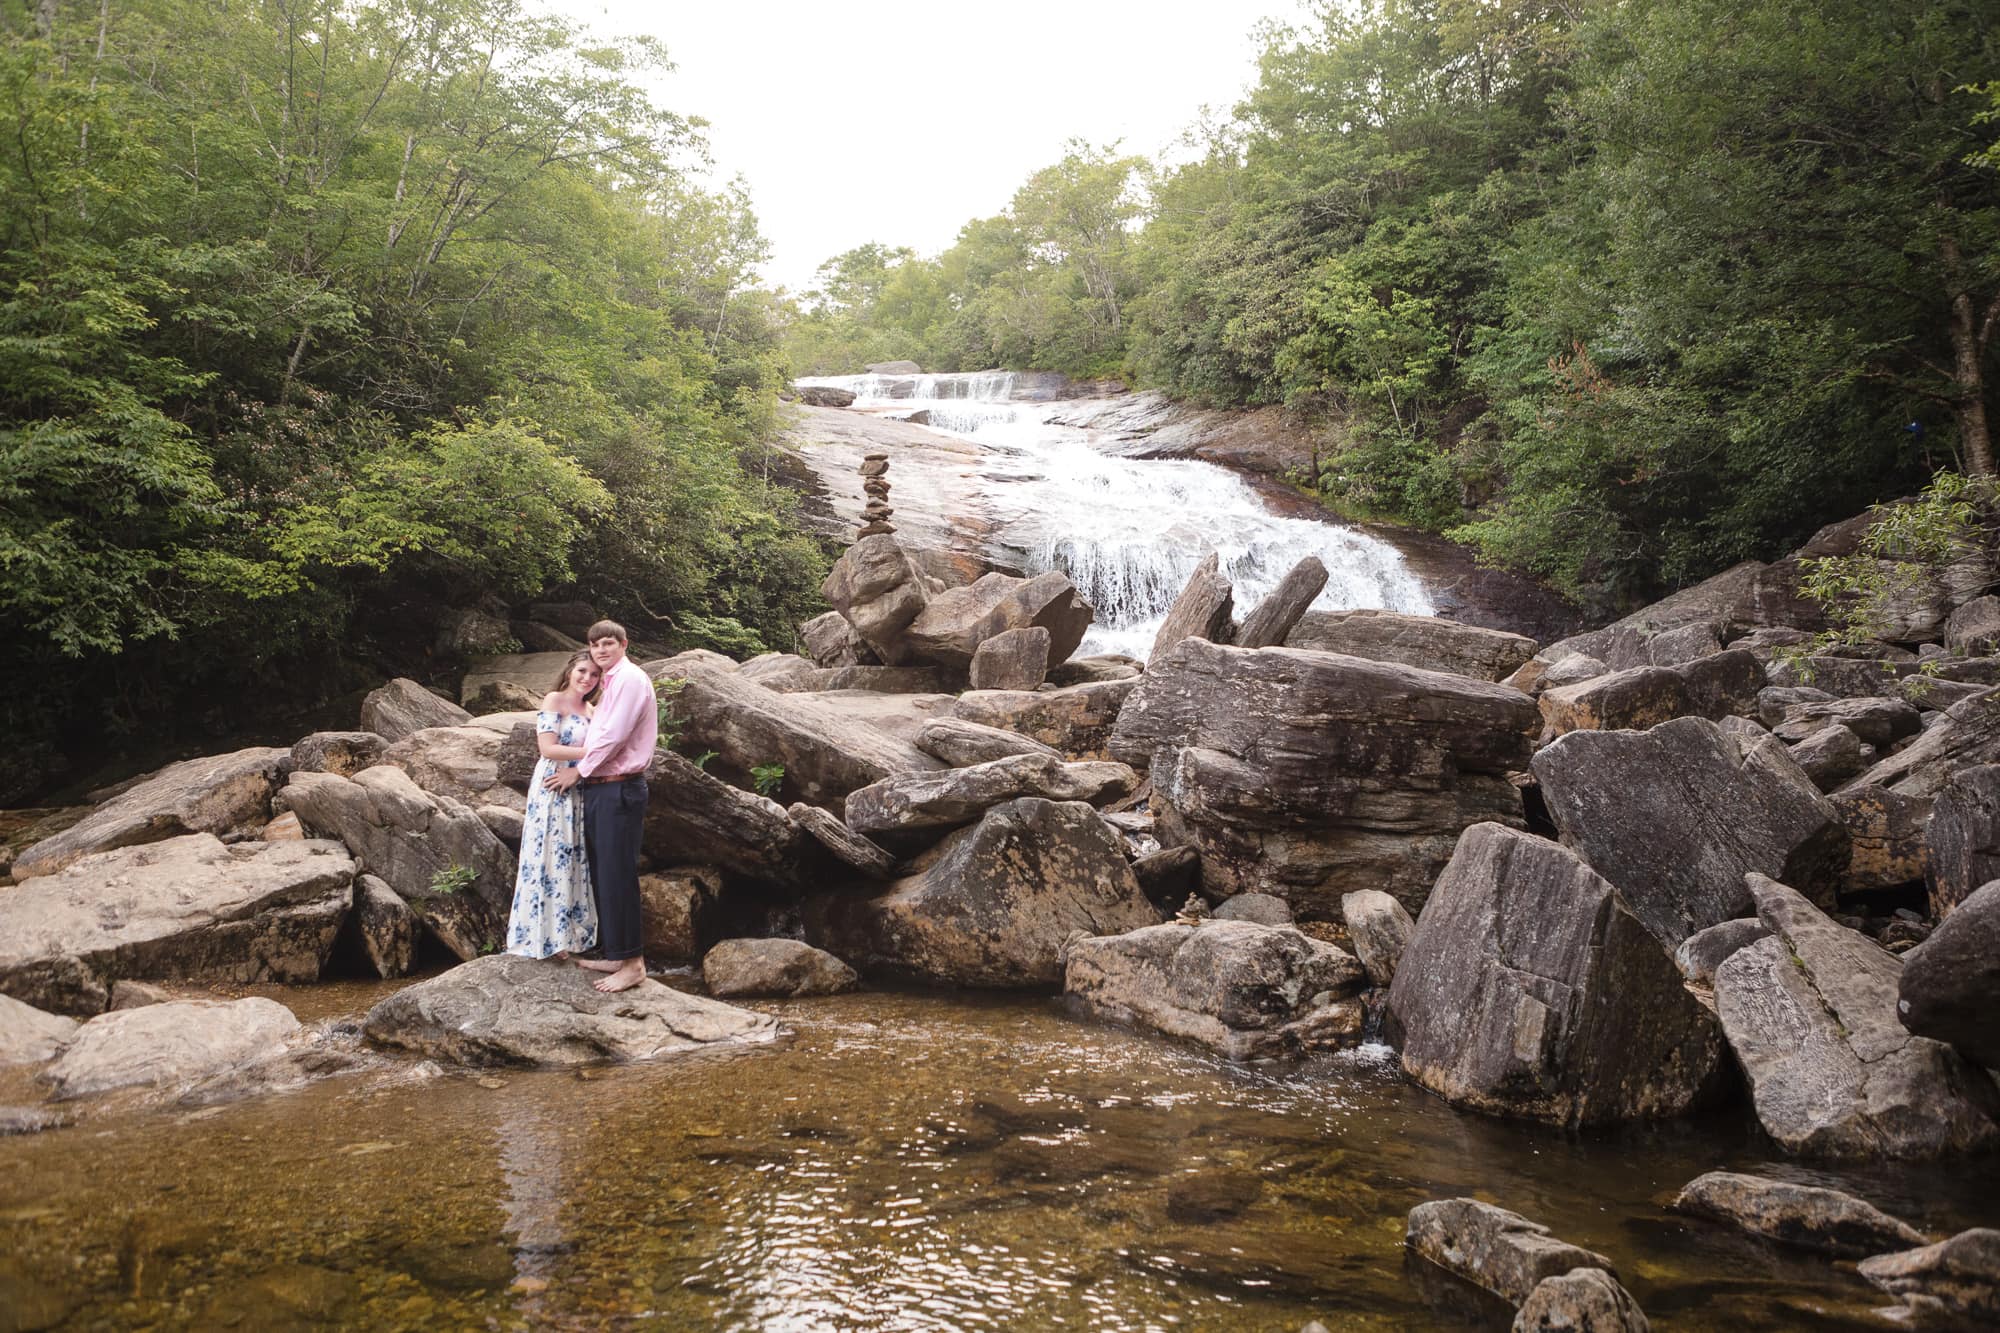 Couple standing on rock near with waterfall behind them in Brevard North Carolina photography done by Kathy Beaver.